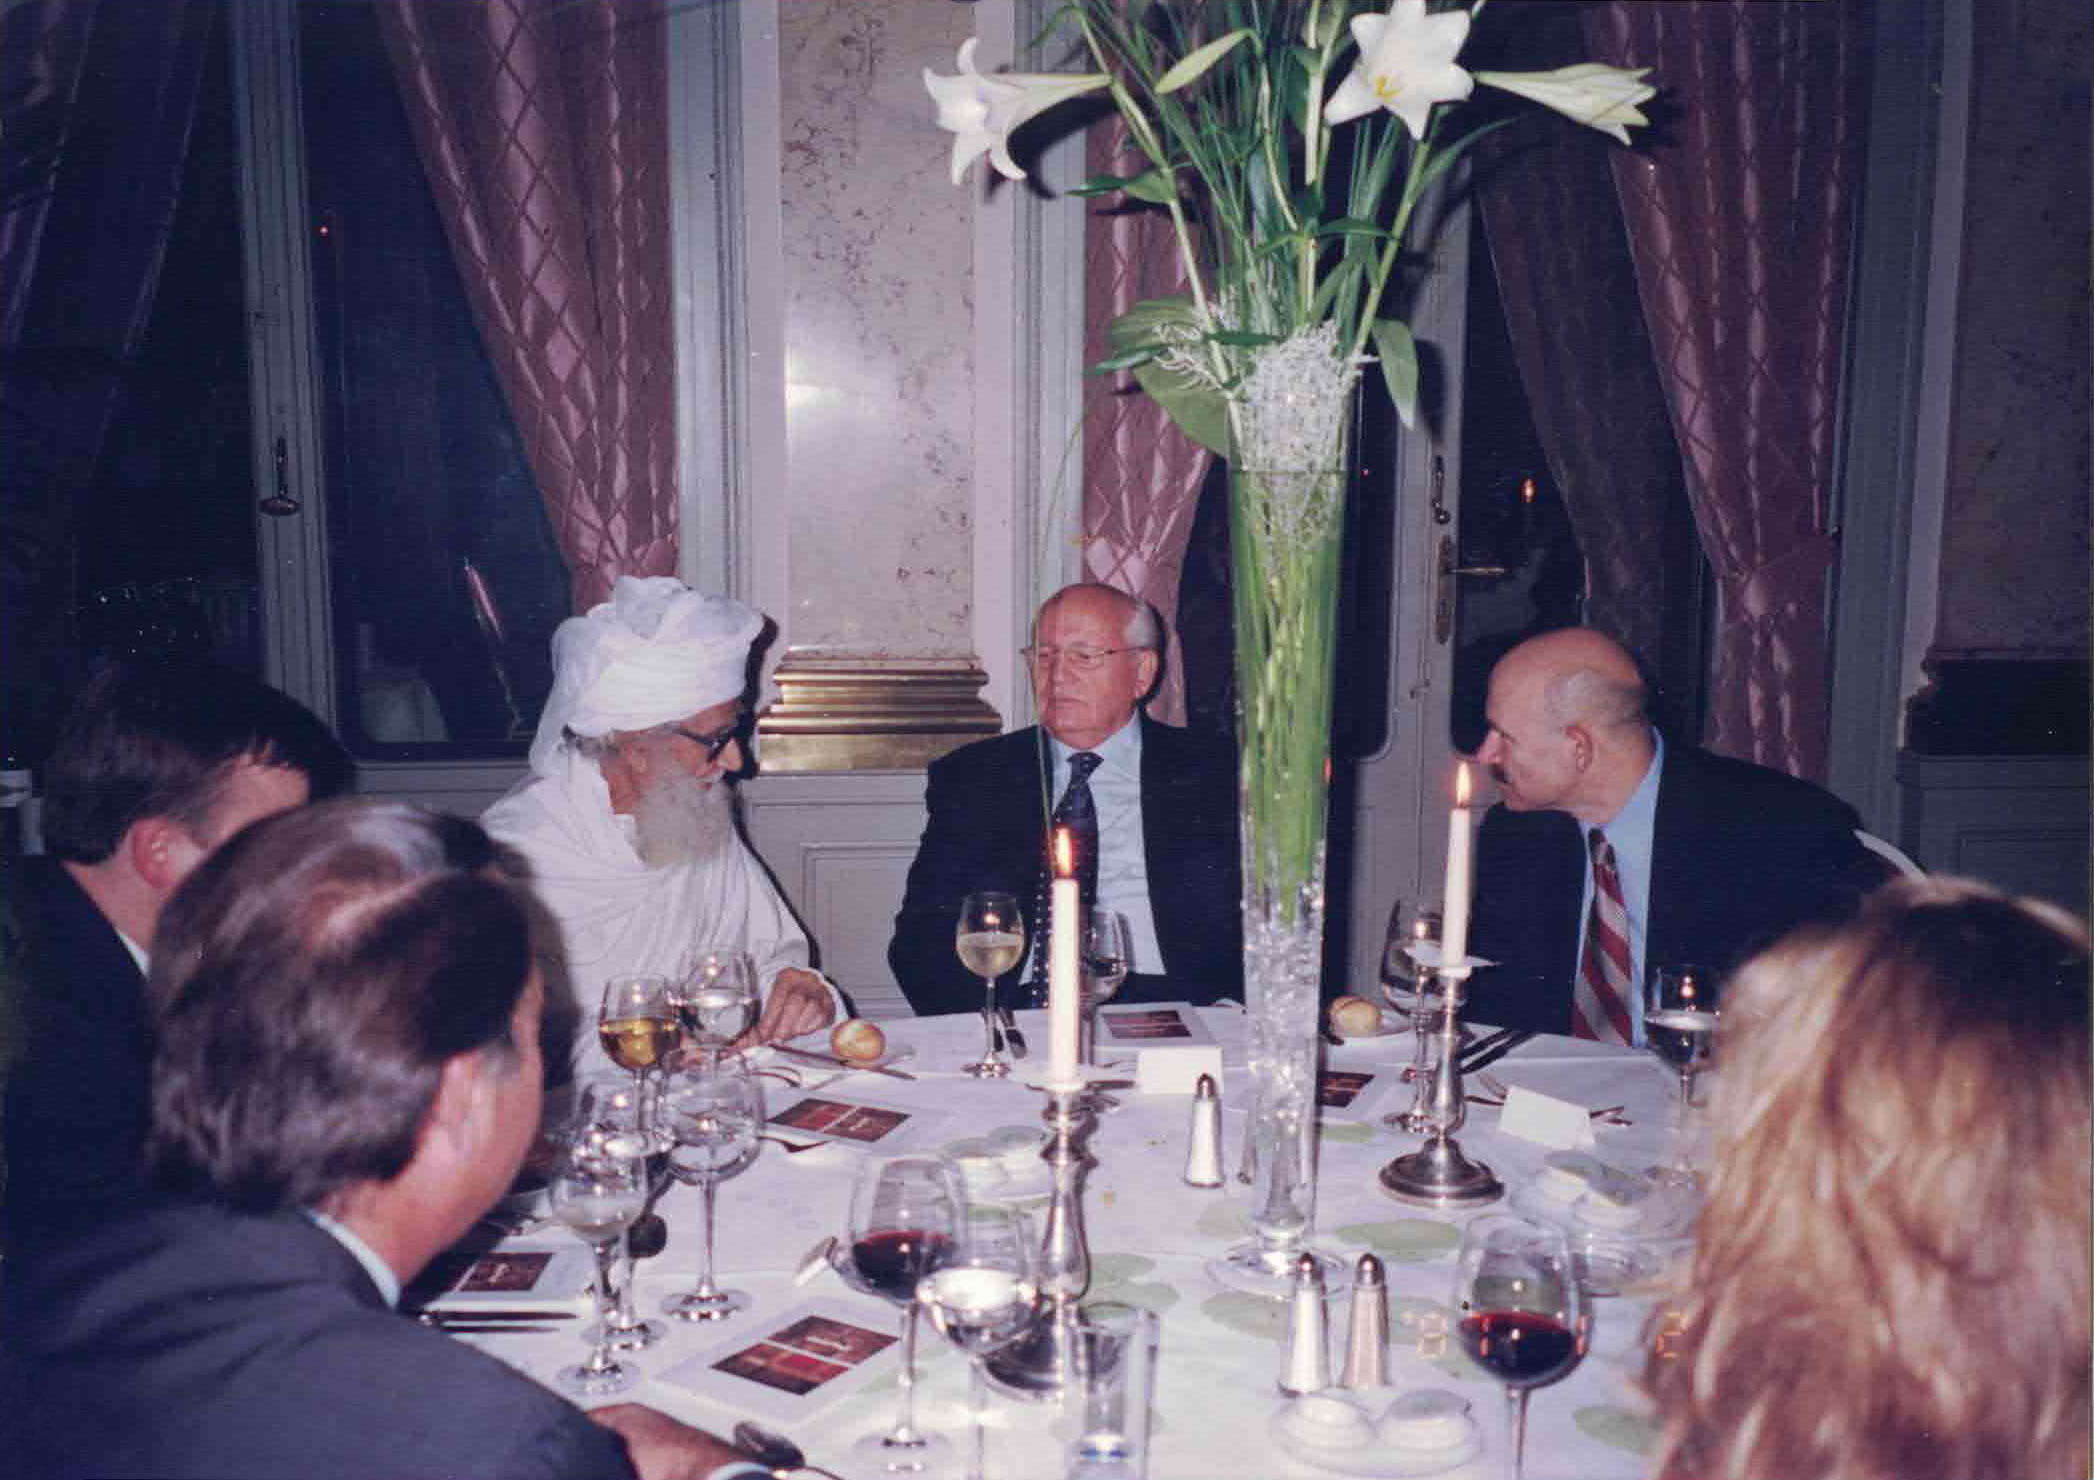 Maulana spoke with former Russian President, Gorbachev, on Muslim militancy, explaining that it has no relation to Islam. Islam is entirely a peaceful religion. 